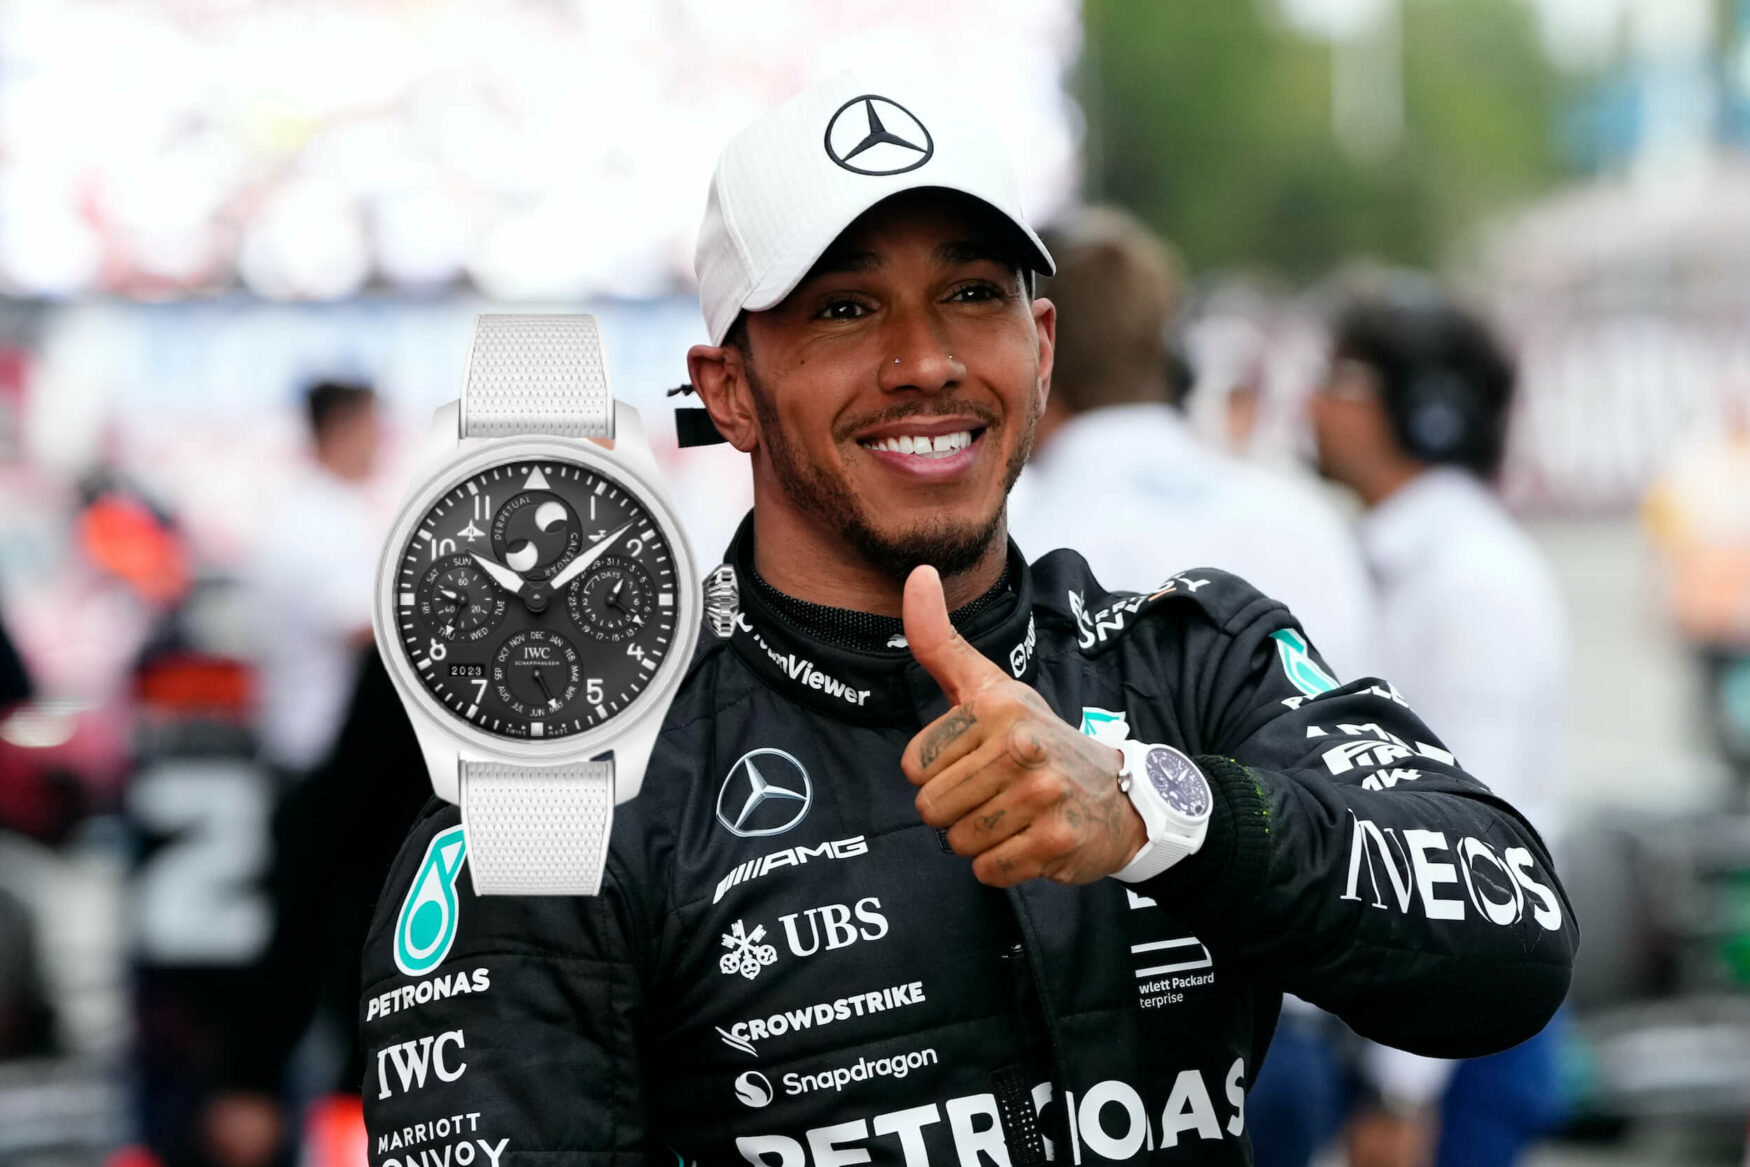 Remember that unreleased IWC Big Pilot’s Watch Perpetual Calendar Top Gun Lake Tahoe Lewis Hamilton was caught wearing? Well it is OUT NOW!